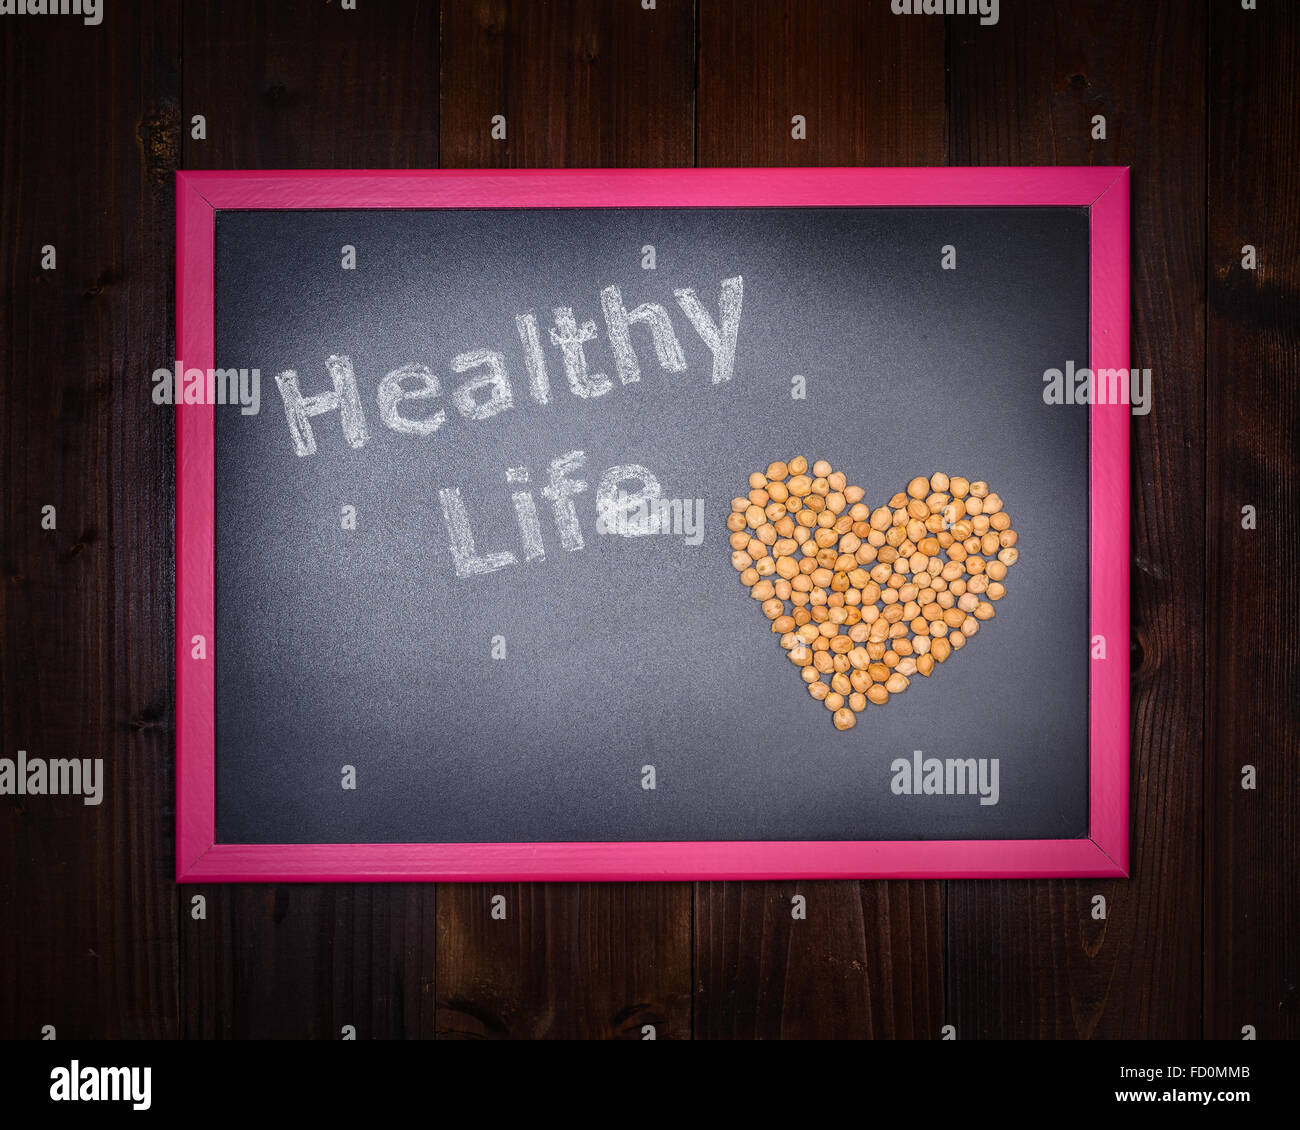 In the picture a blackboard, on the left side with written 'Healthy Life' and chickpeas on the right side, drawing a heart on wo Stock Photo